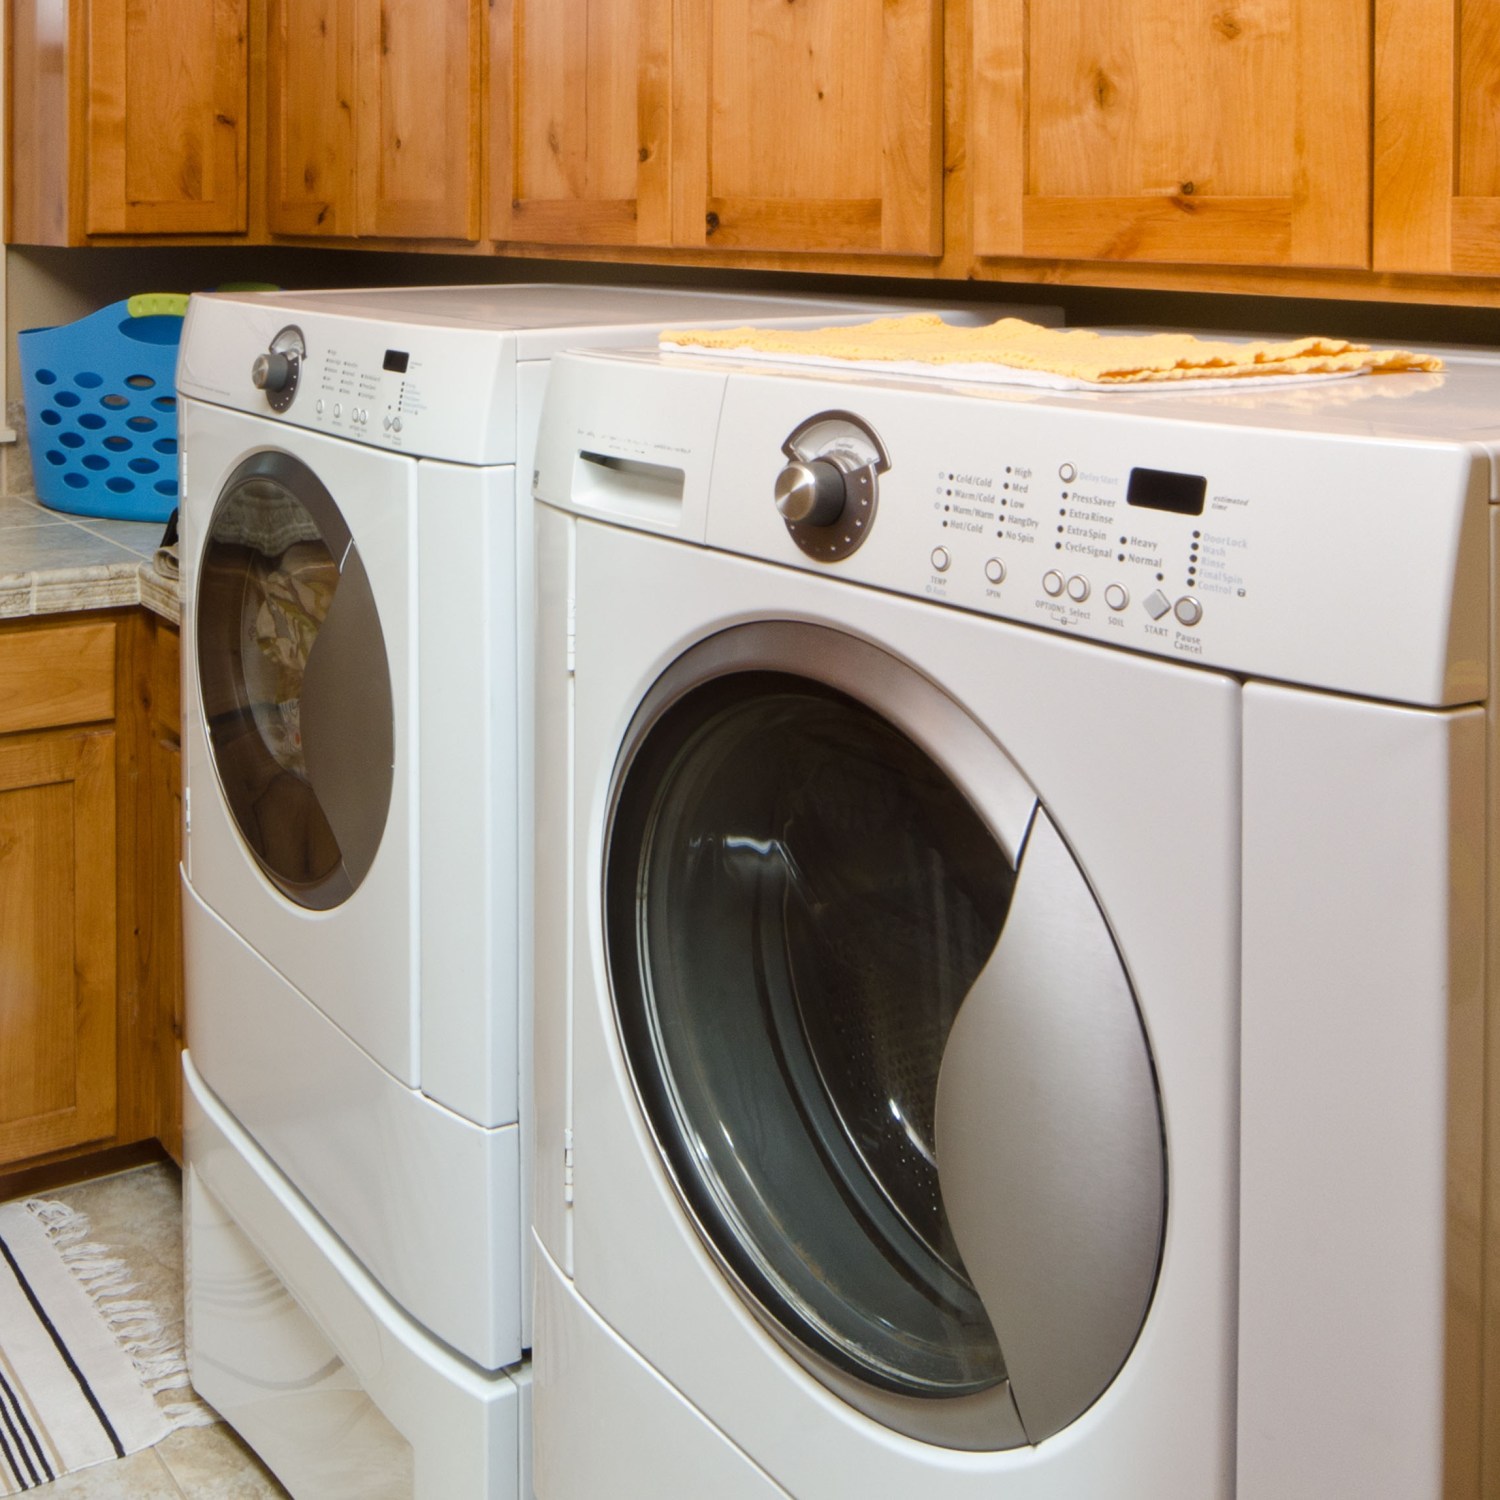 A modern laundry room with front loading washer and dryer and beautiful wood cabinets.